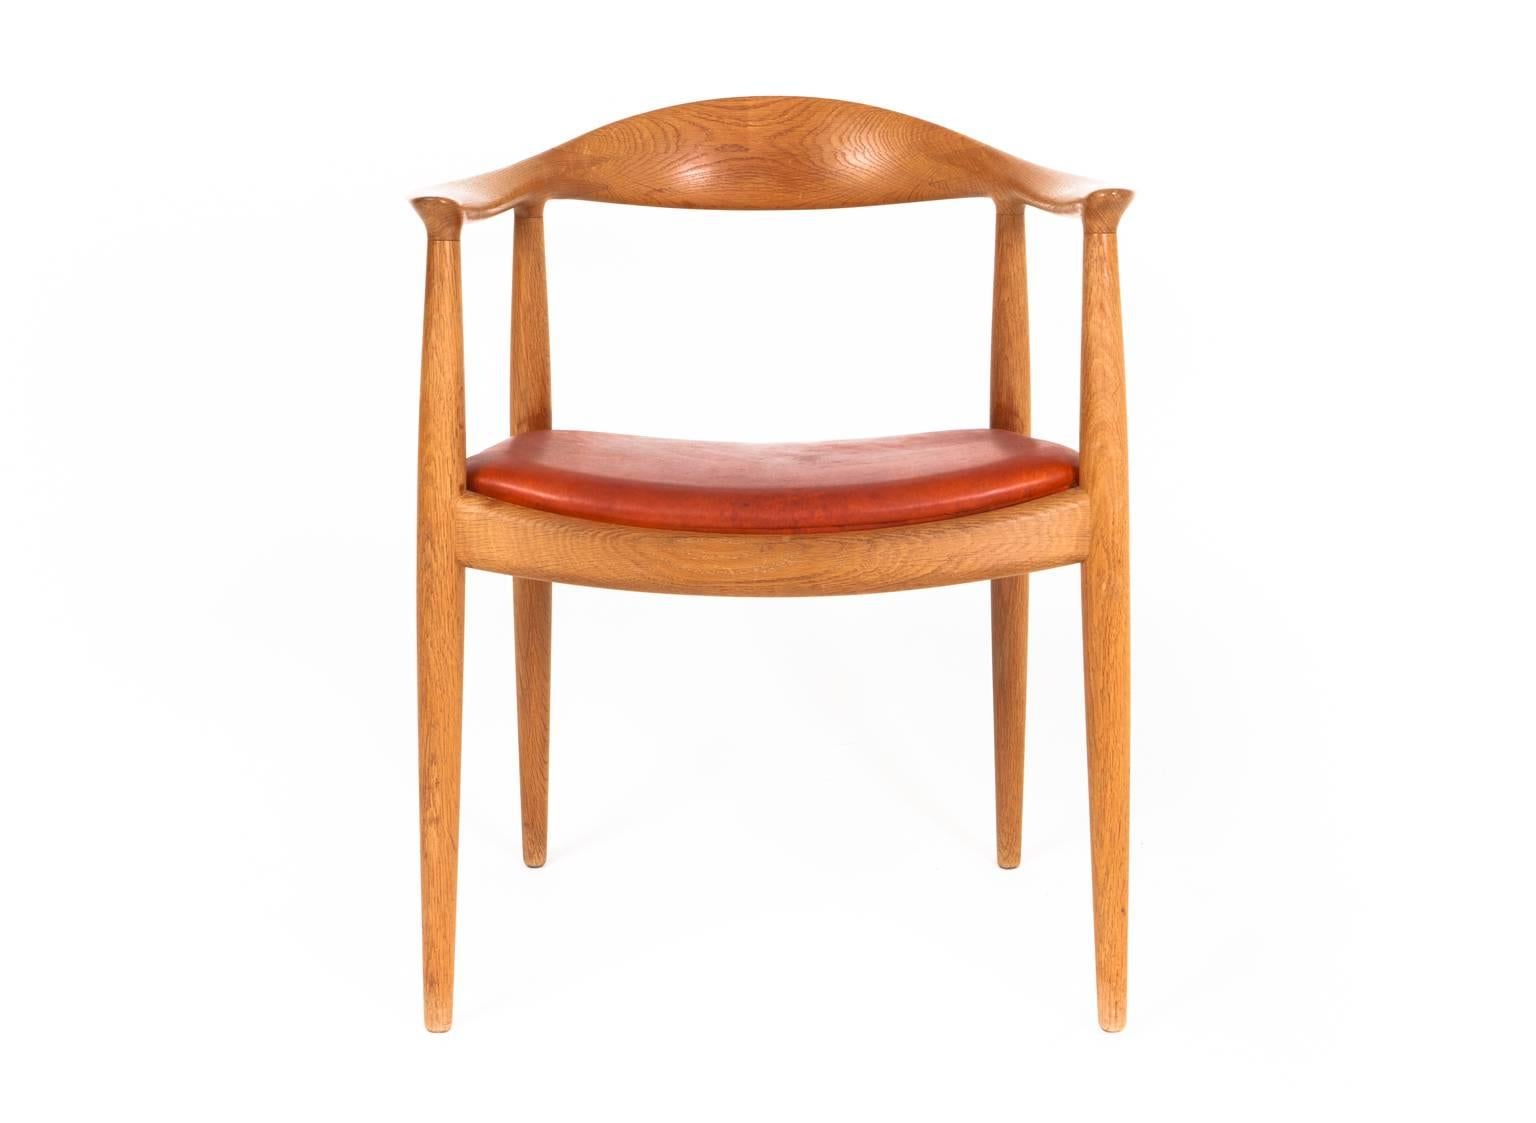 Hans J. Wegner

'The Chair'

Armchair with oak frame. Seat upholstered with natural red brown leather.

Model JH 503
Designed 1949. 

Made and stamped by cabinetmaker 
Johannes Hansen.